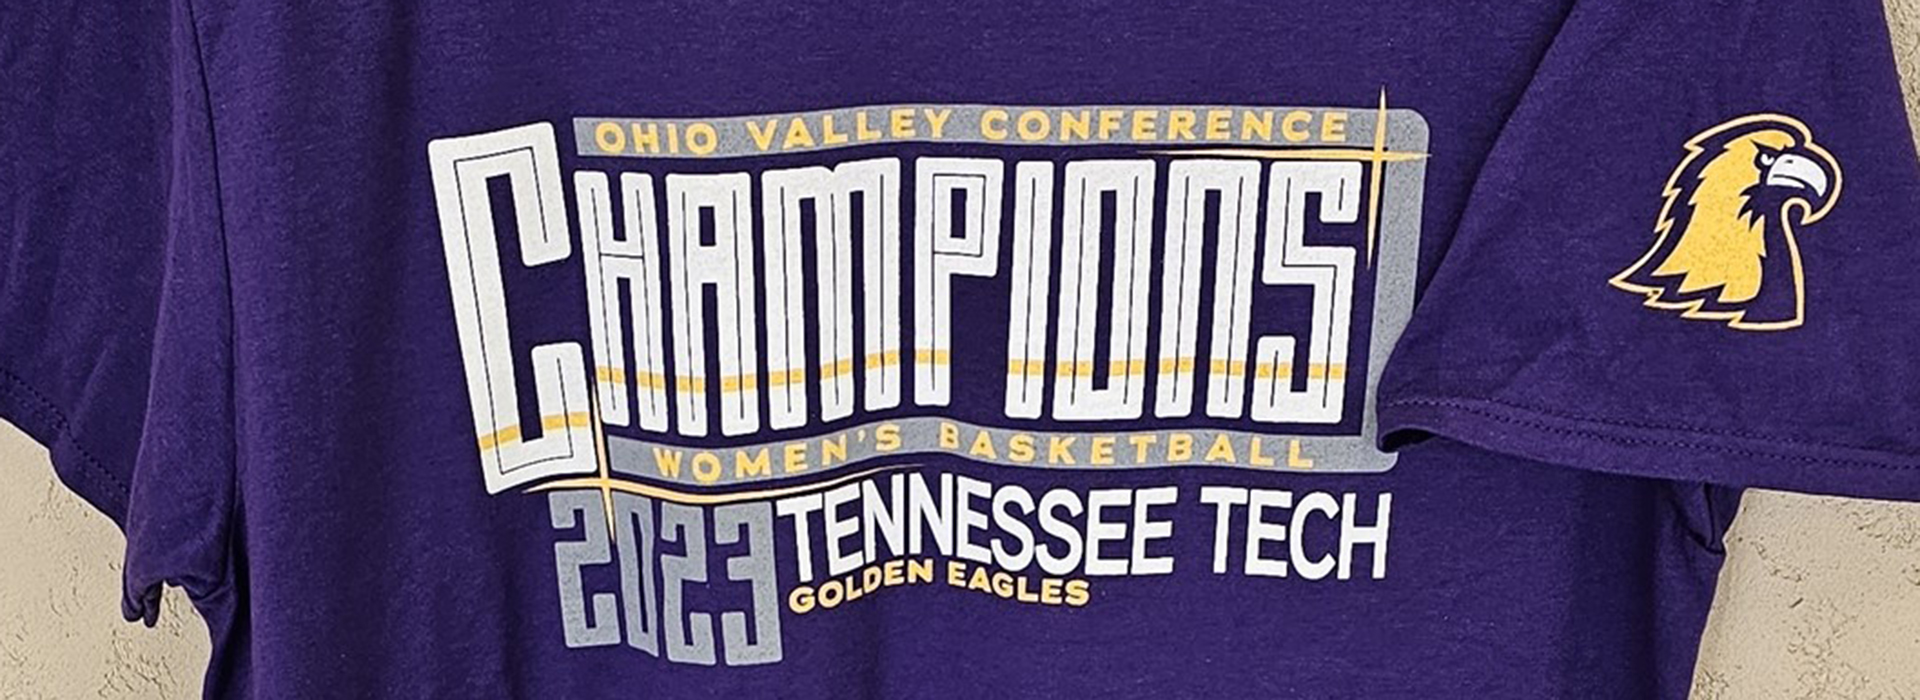 Tech women's basketball OVC championship shirts available for a limited time